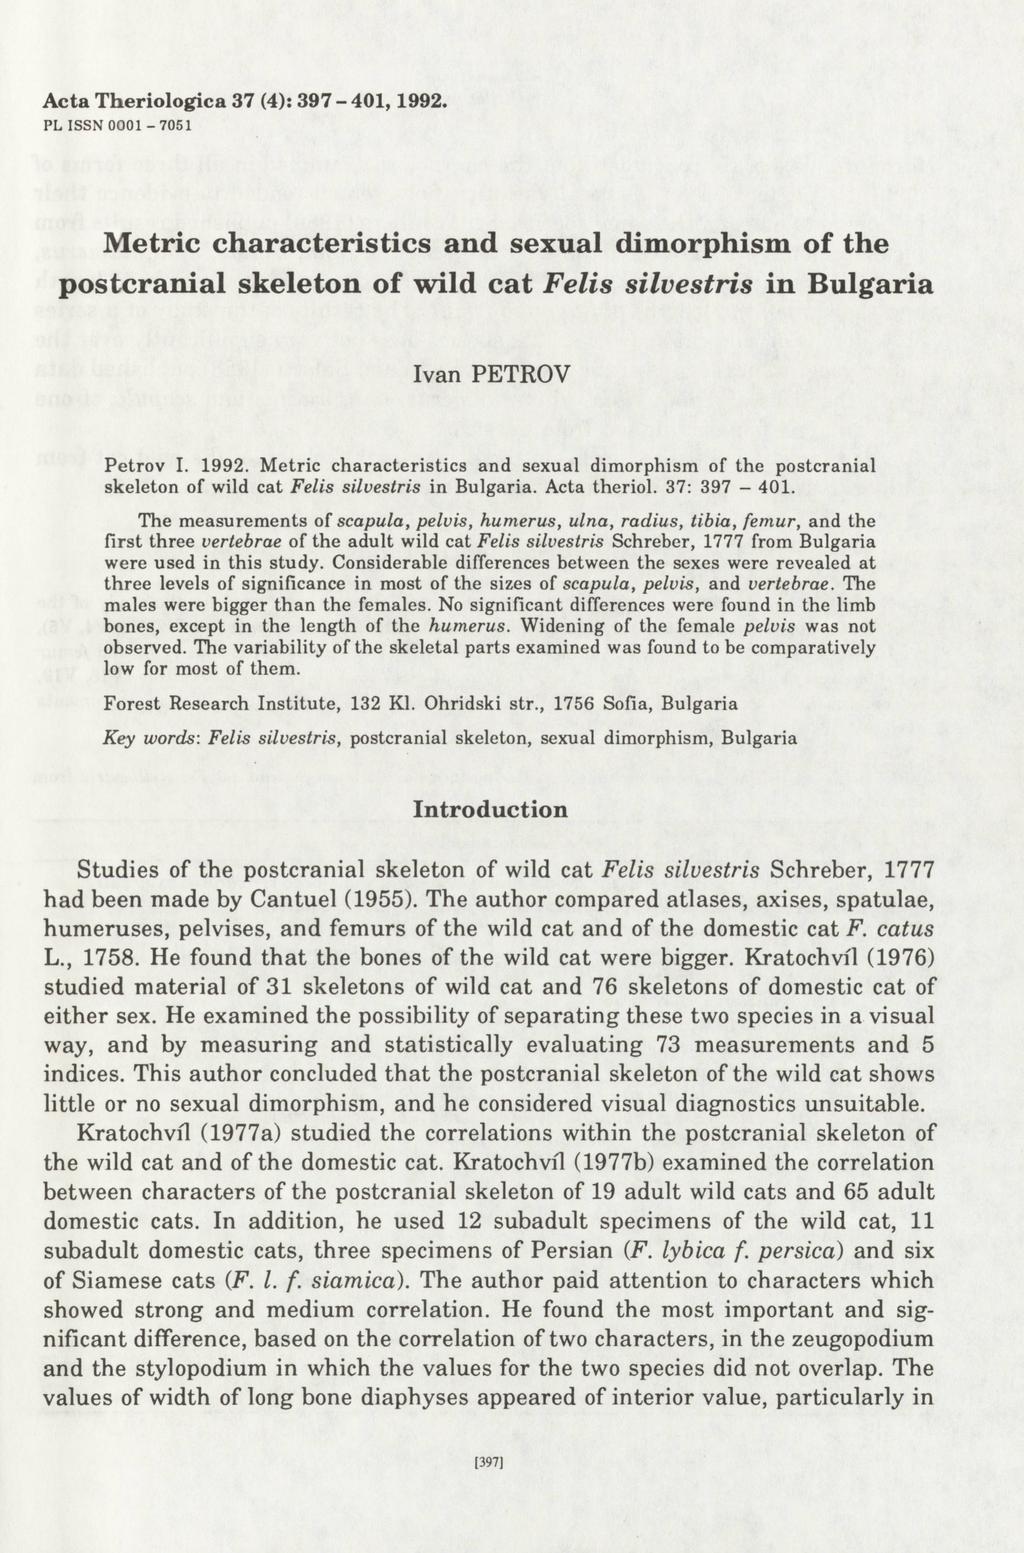 Acta Theriologica 37 (4): 397-401,1992. PL ISSN 0001-7 051 Metric characteristics and sexual dimorphism of the postcranial skeleton of wild cat Felis silvestris in Bulgaria Ivan PETROV Petrov I. 1992.